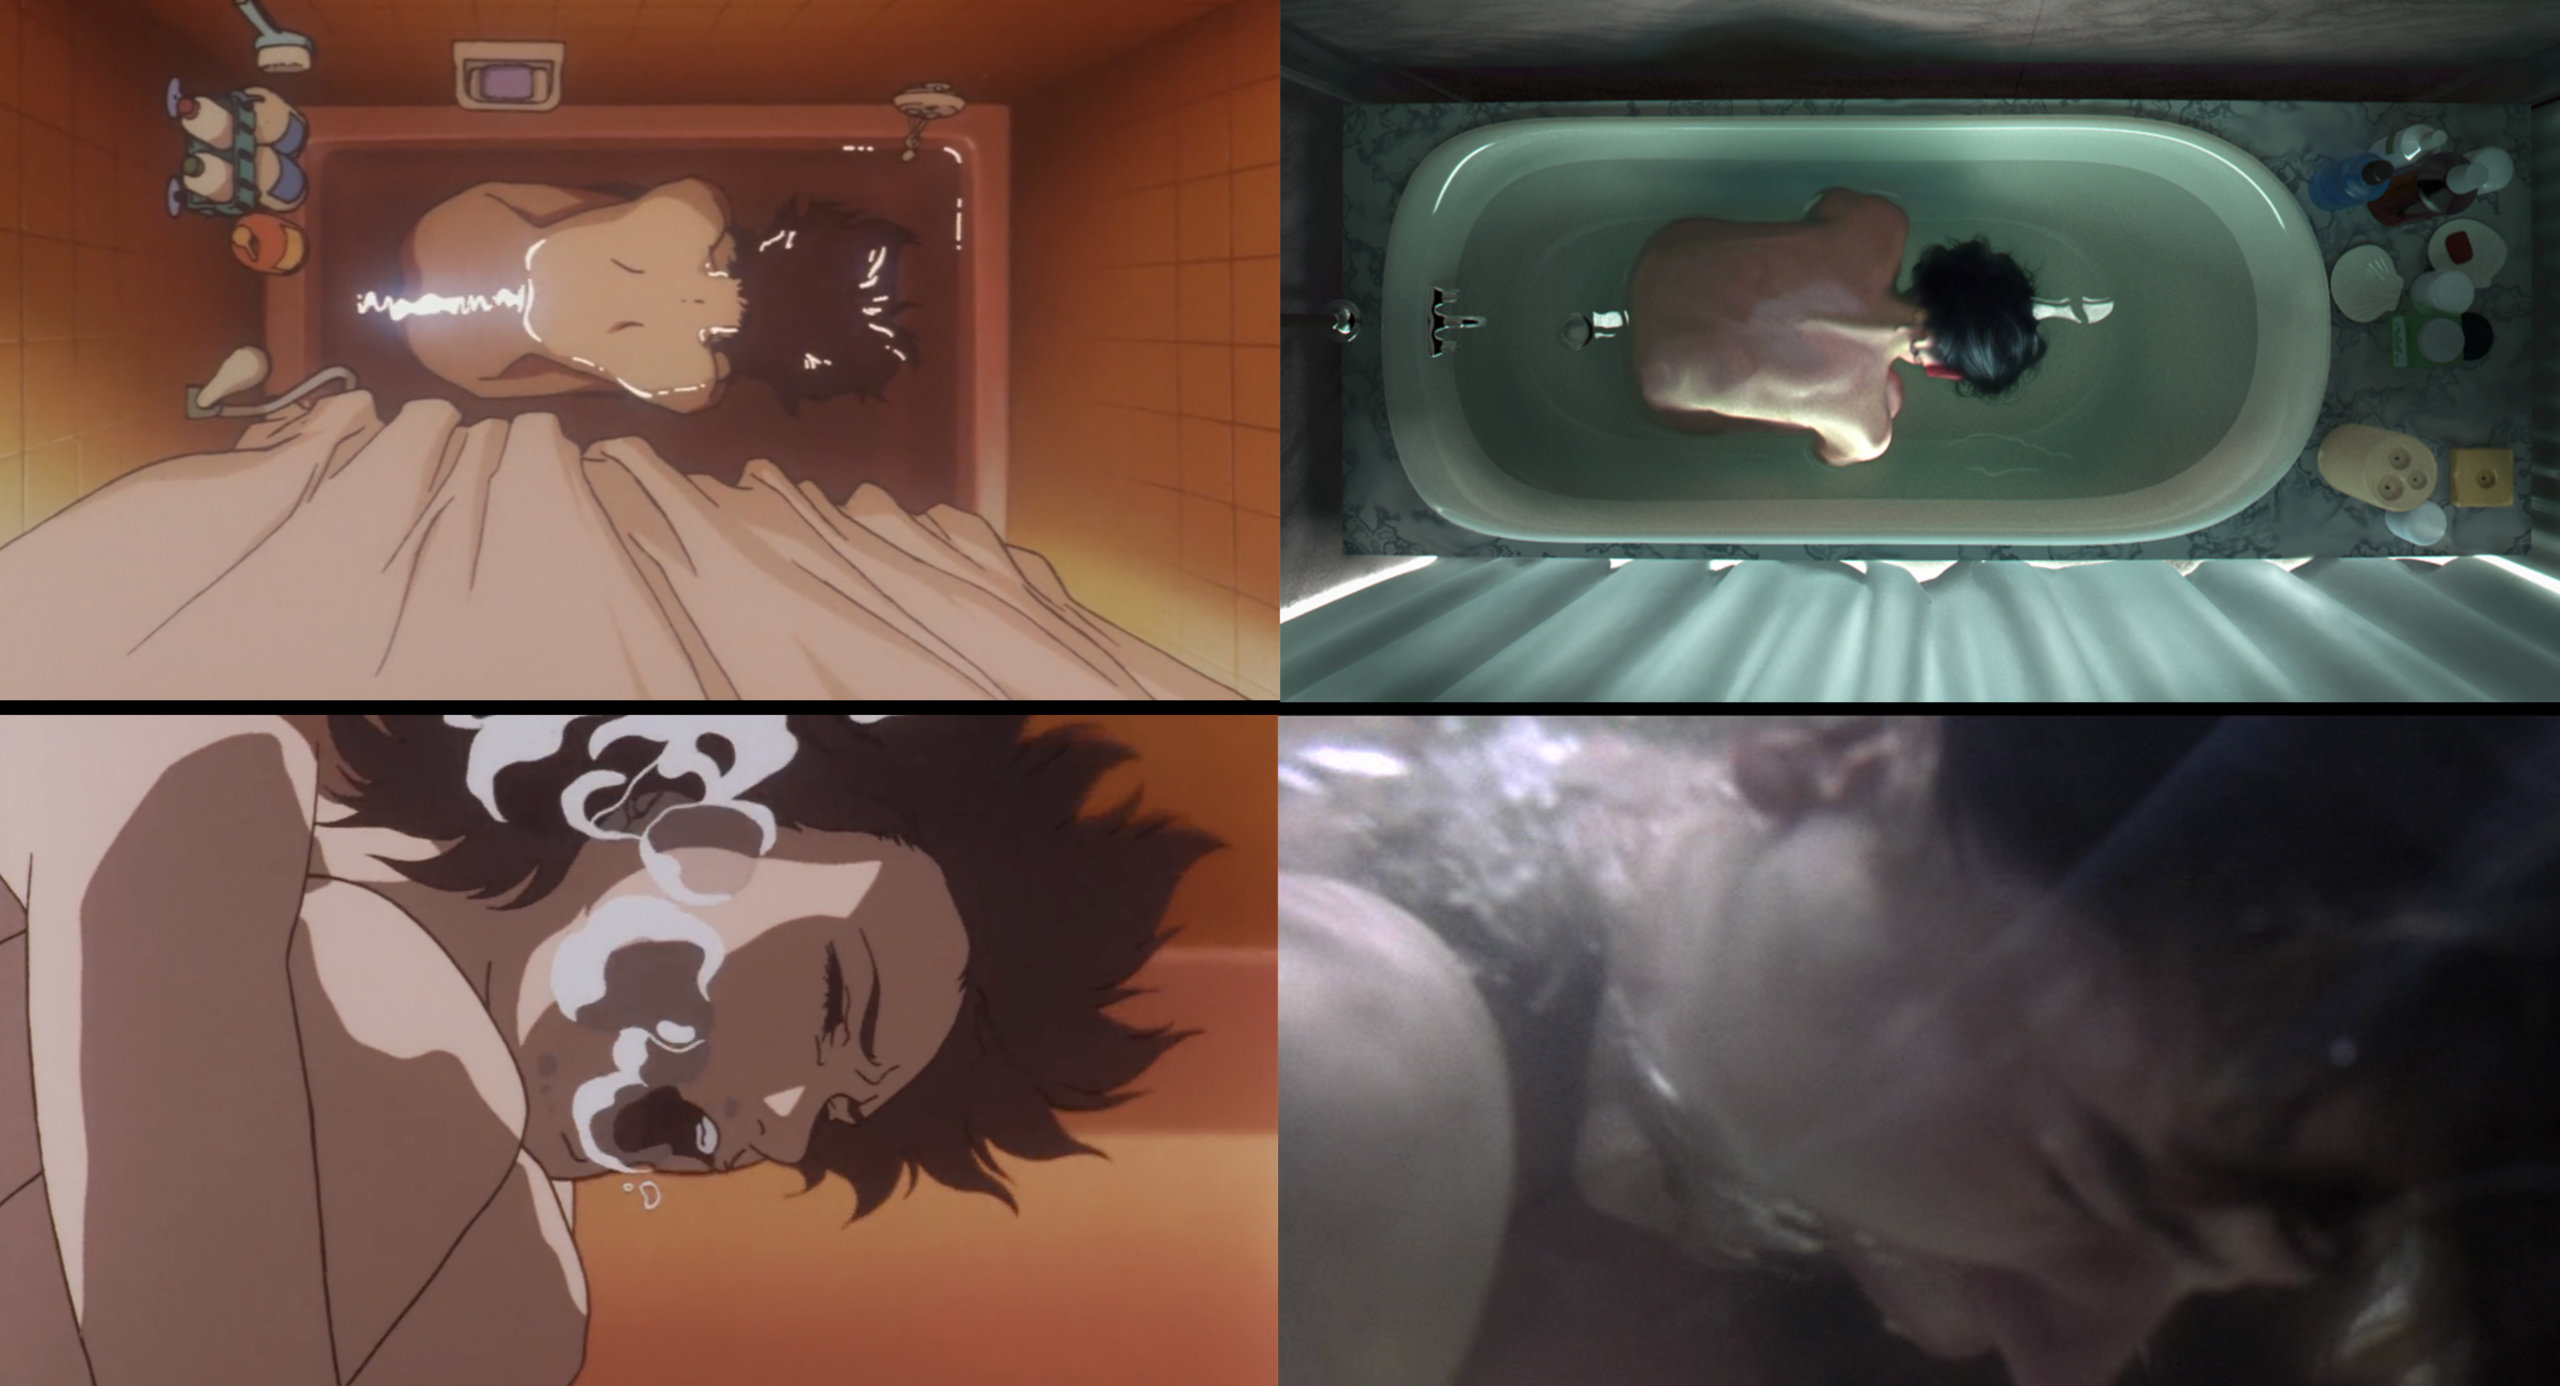 A comparison between the bath tub scenes in Perfect Blue and Requiem for a Dream